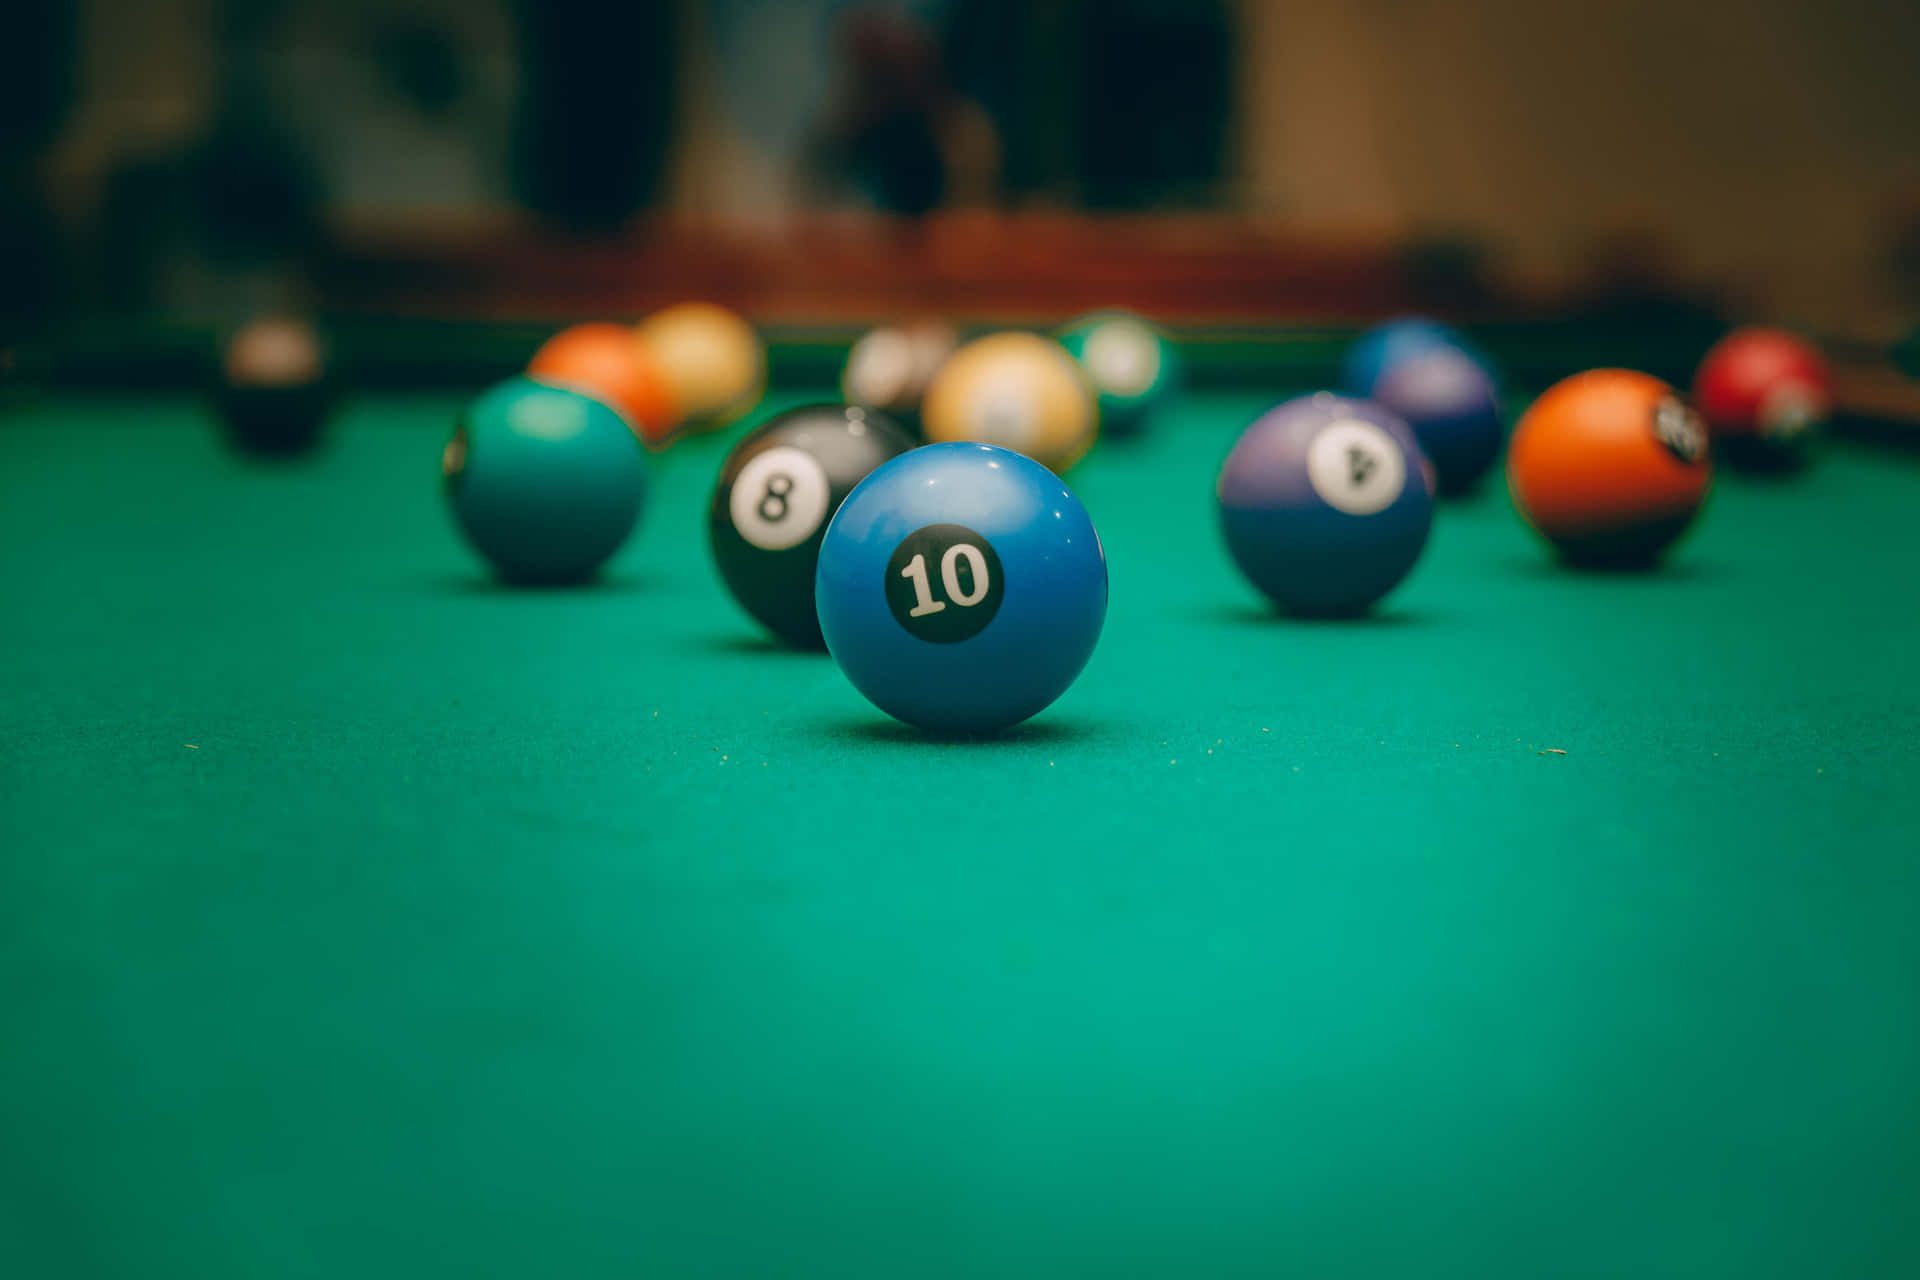 Classic Blue Pool Table with Number 10 Ball Wallpaper